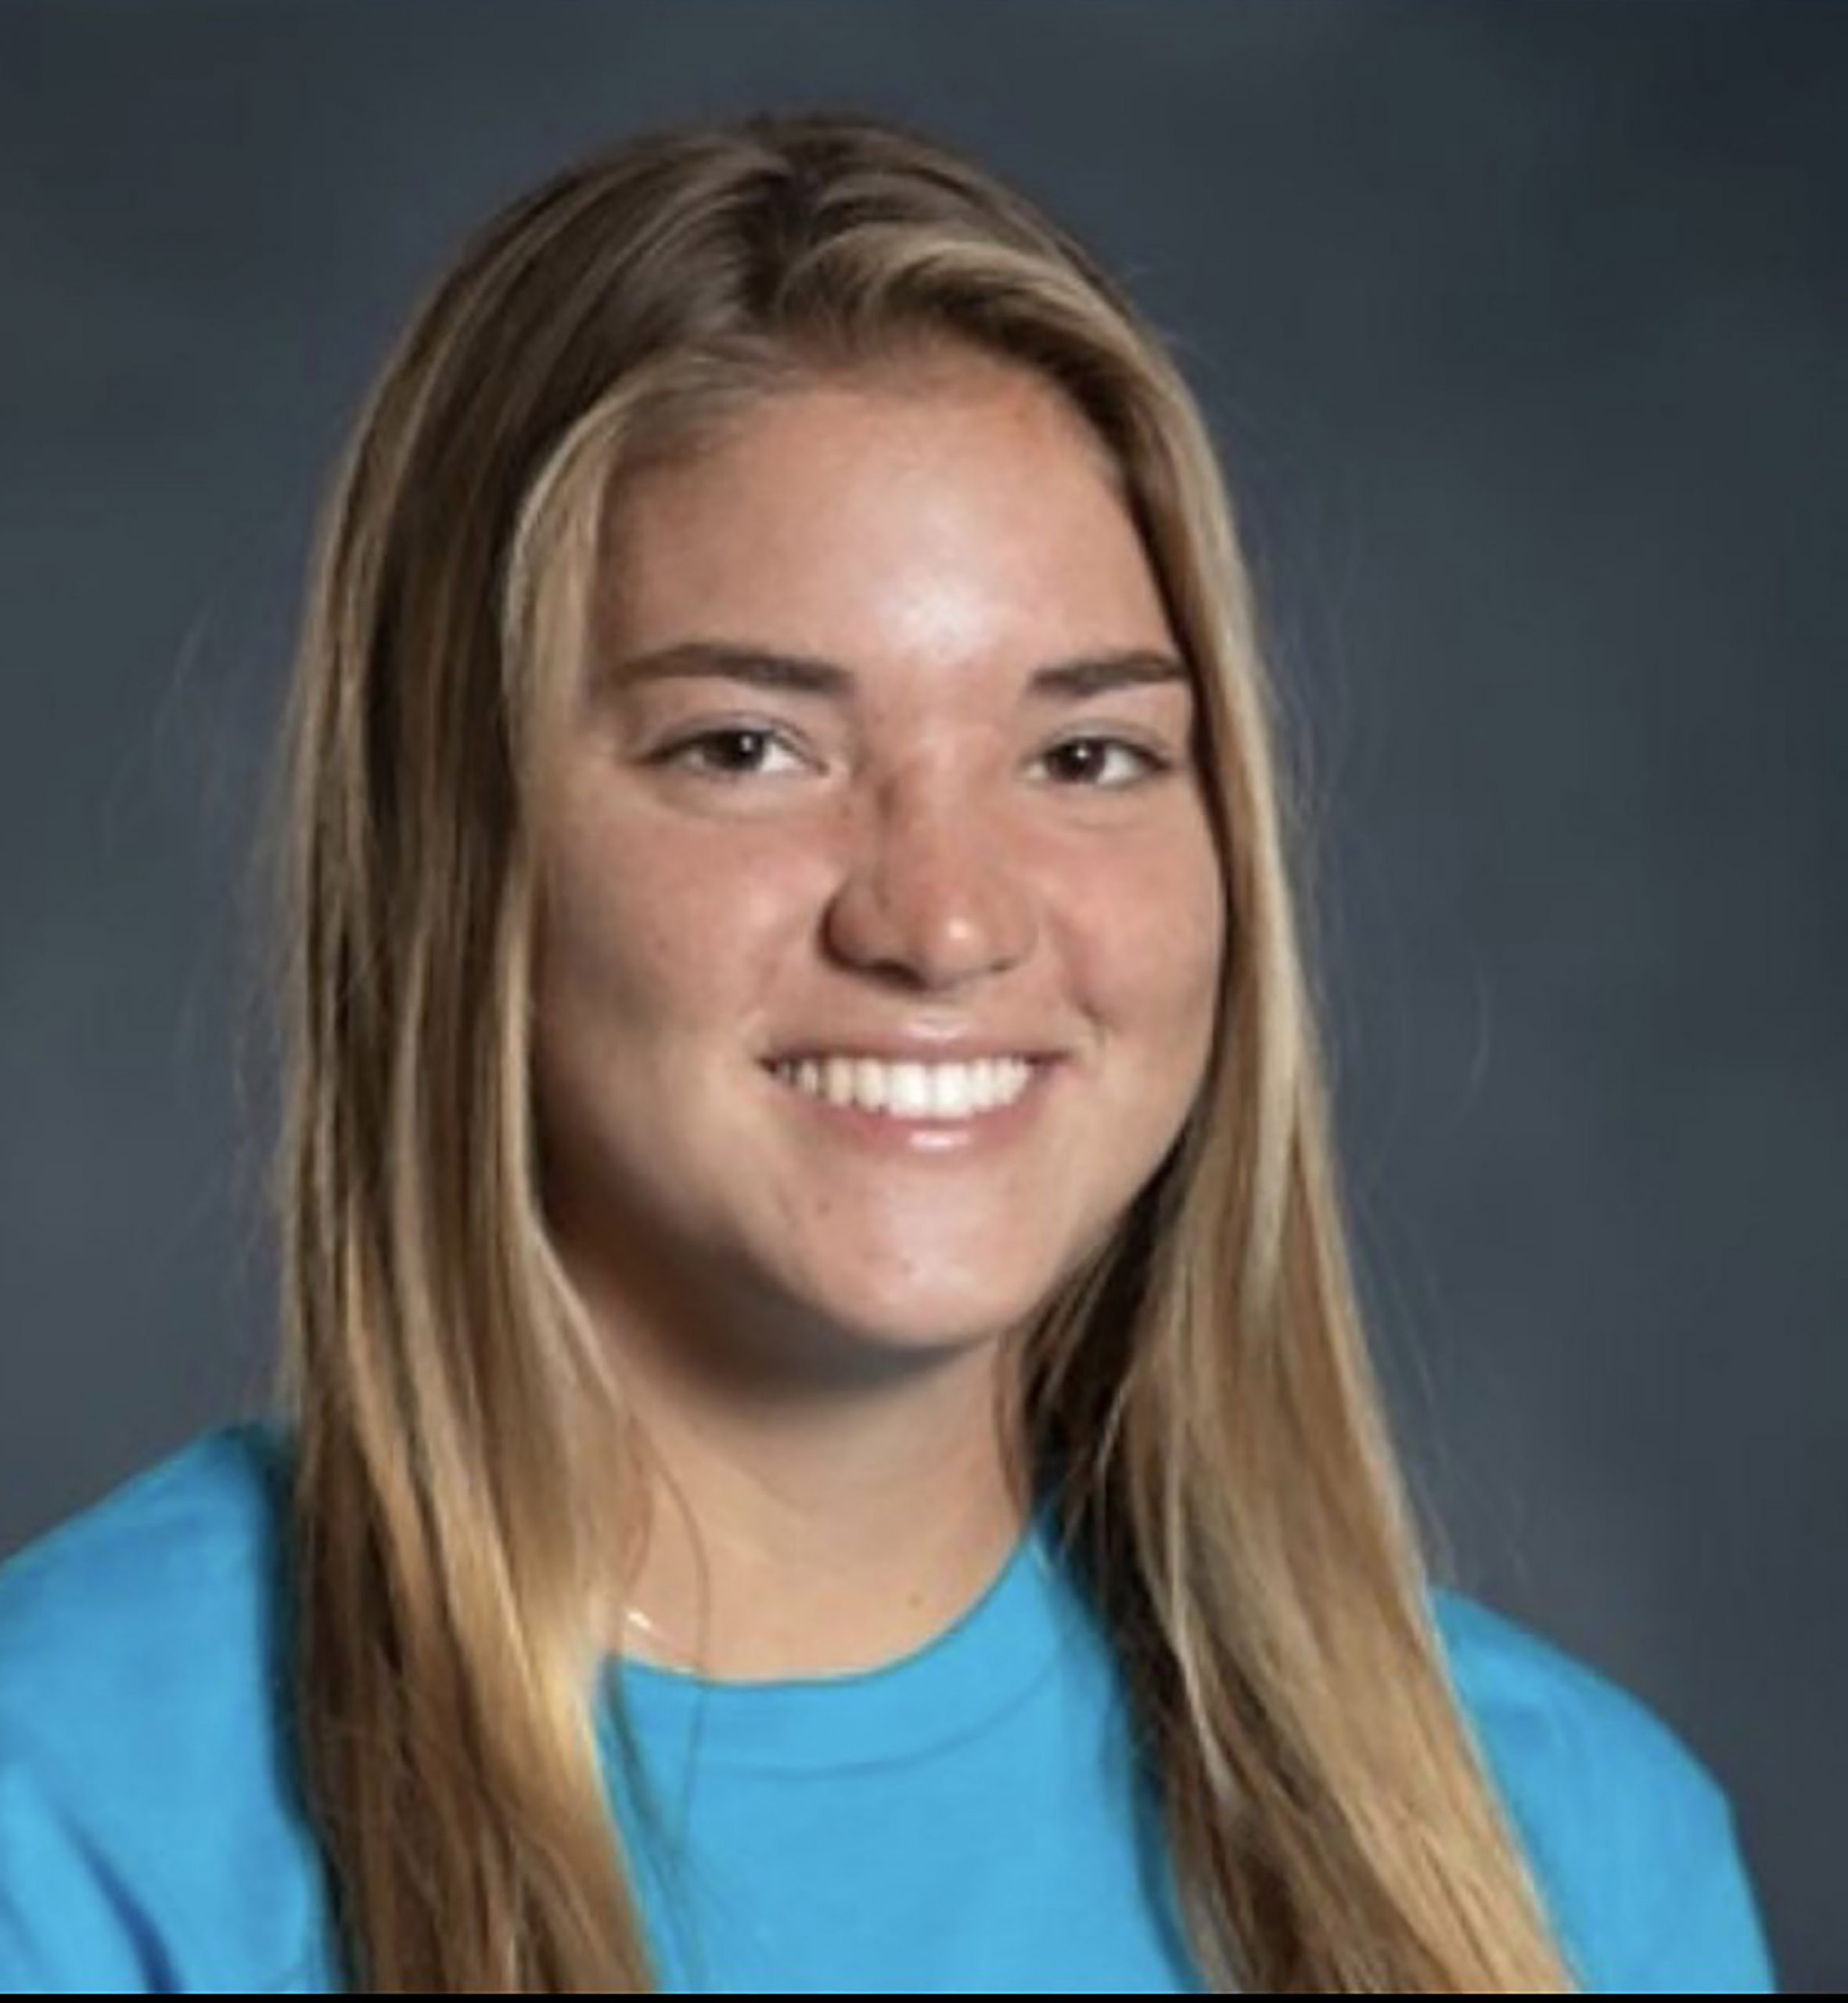 Keiser University Student-Athlete Assists with Life-Saving Rescue